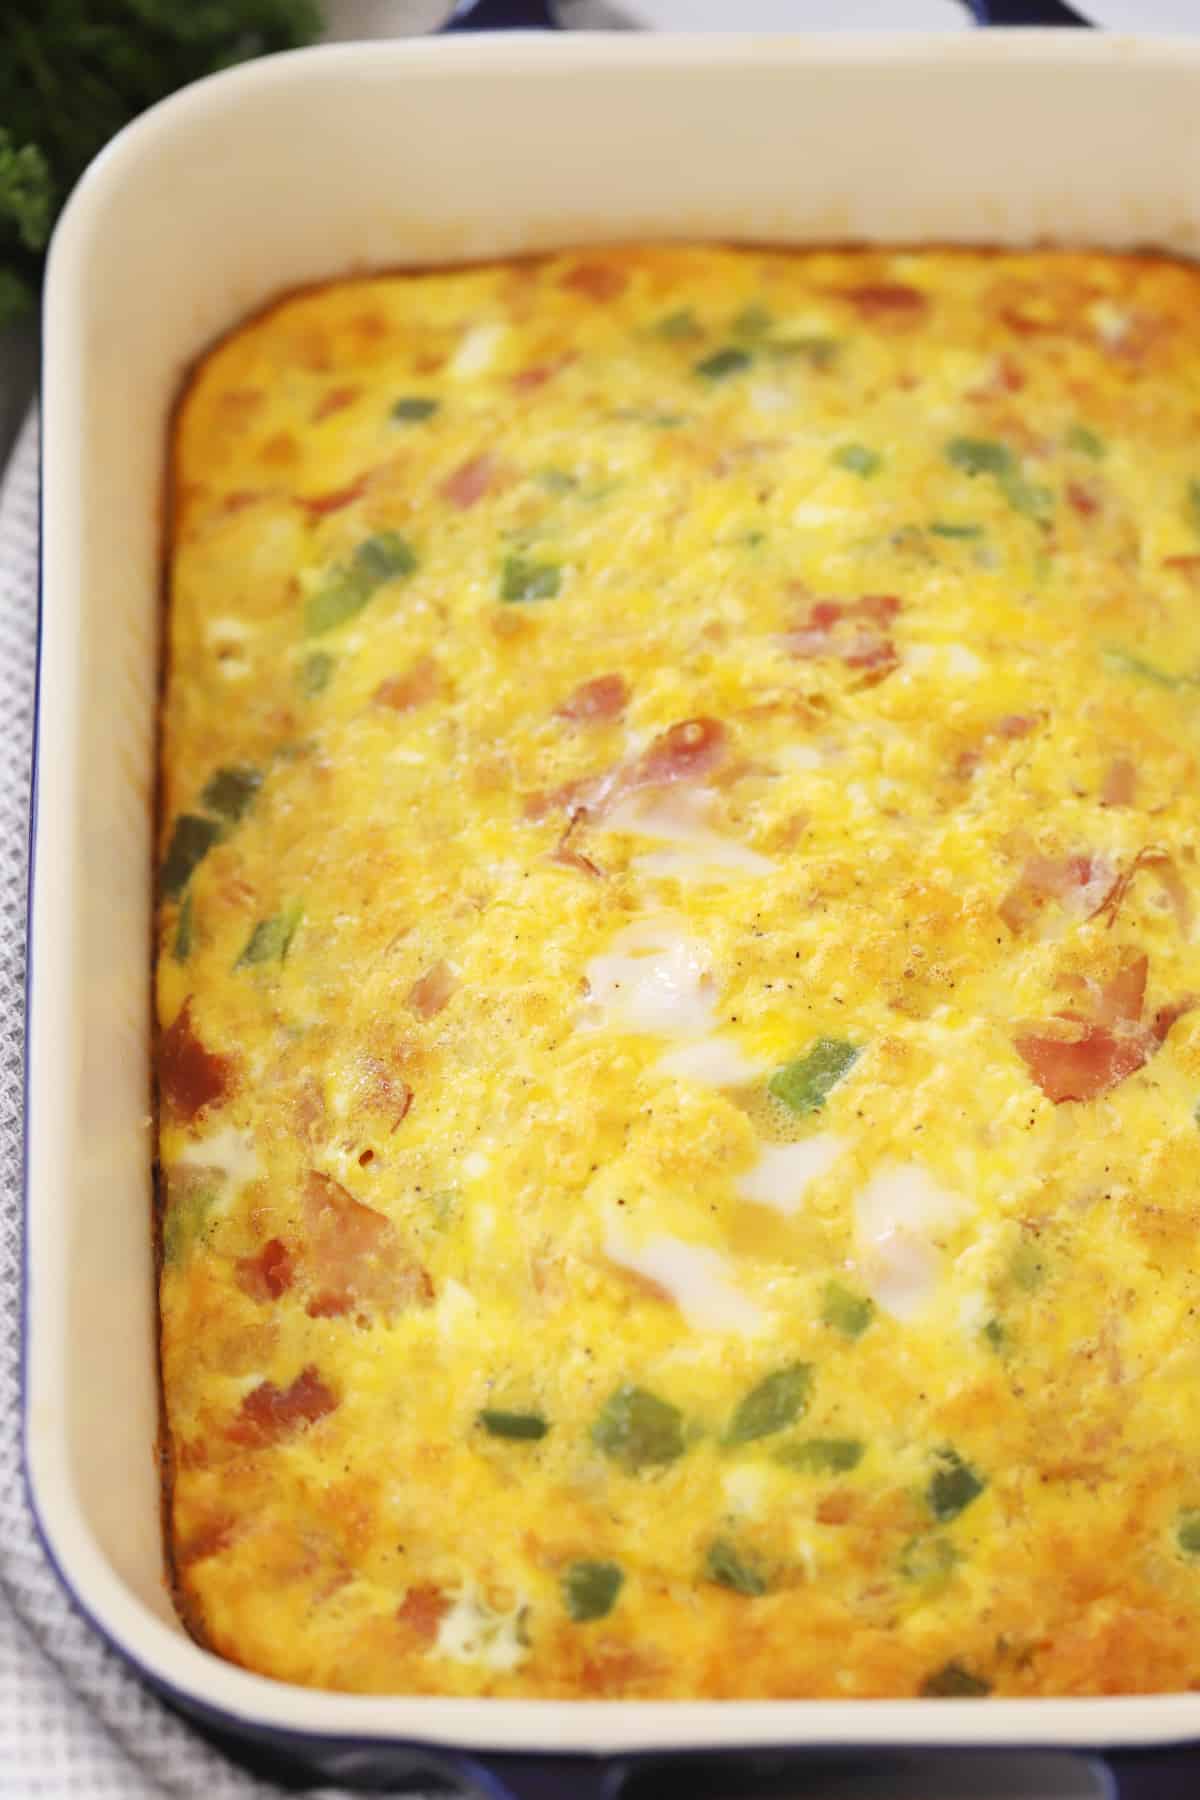 Baked omelet in a baking dish.